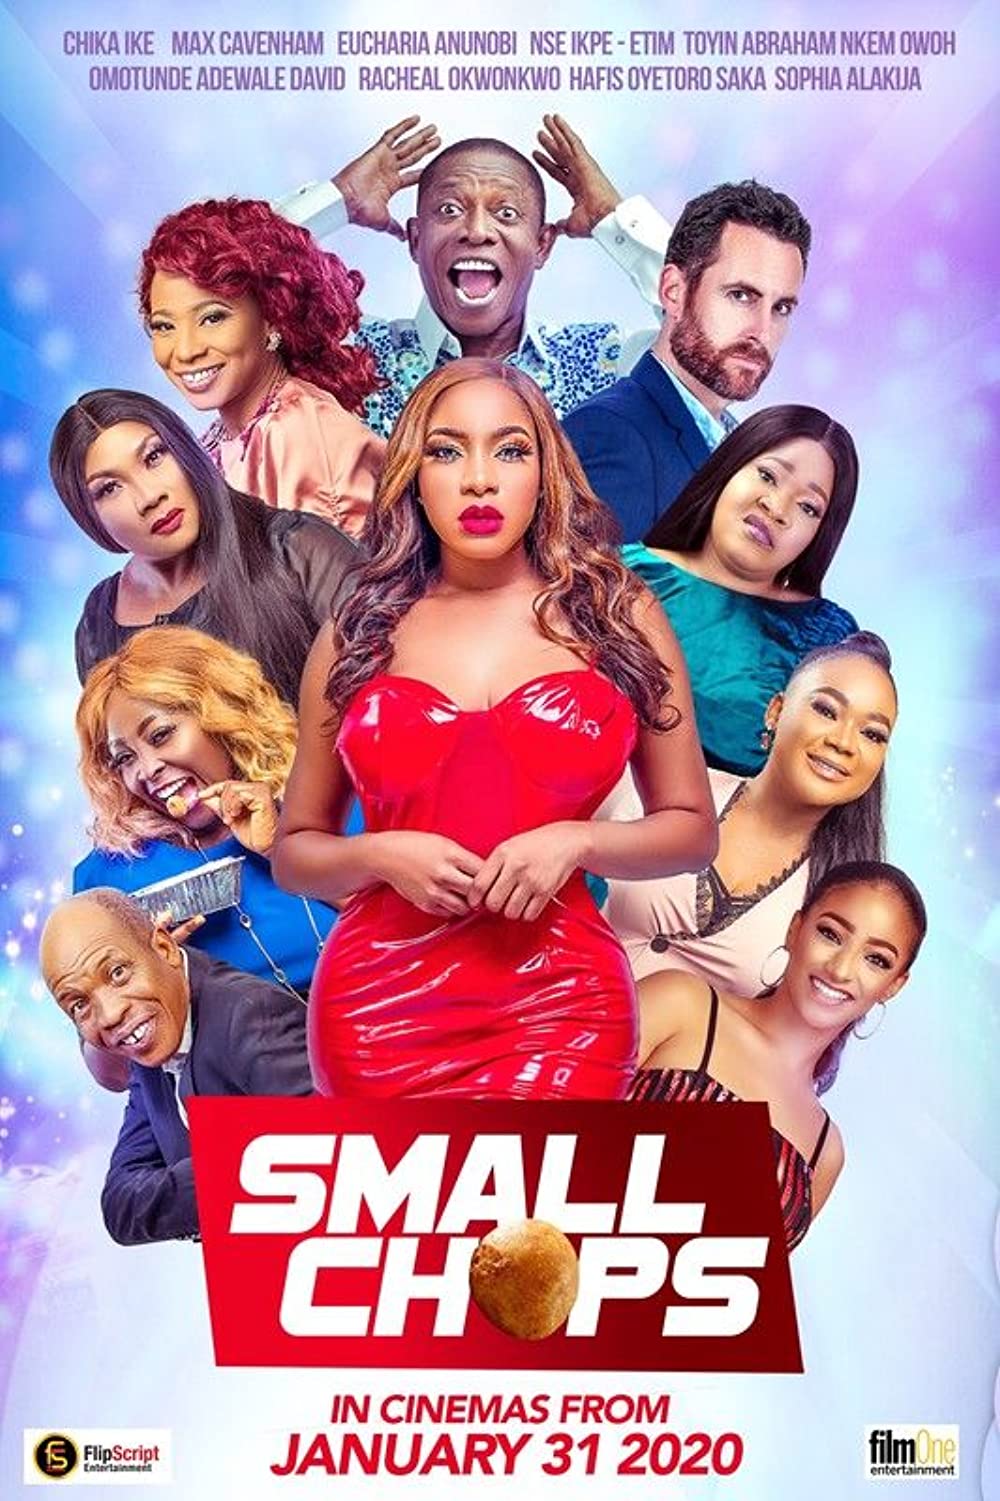 Small Chops 2020 movie poster